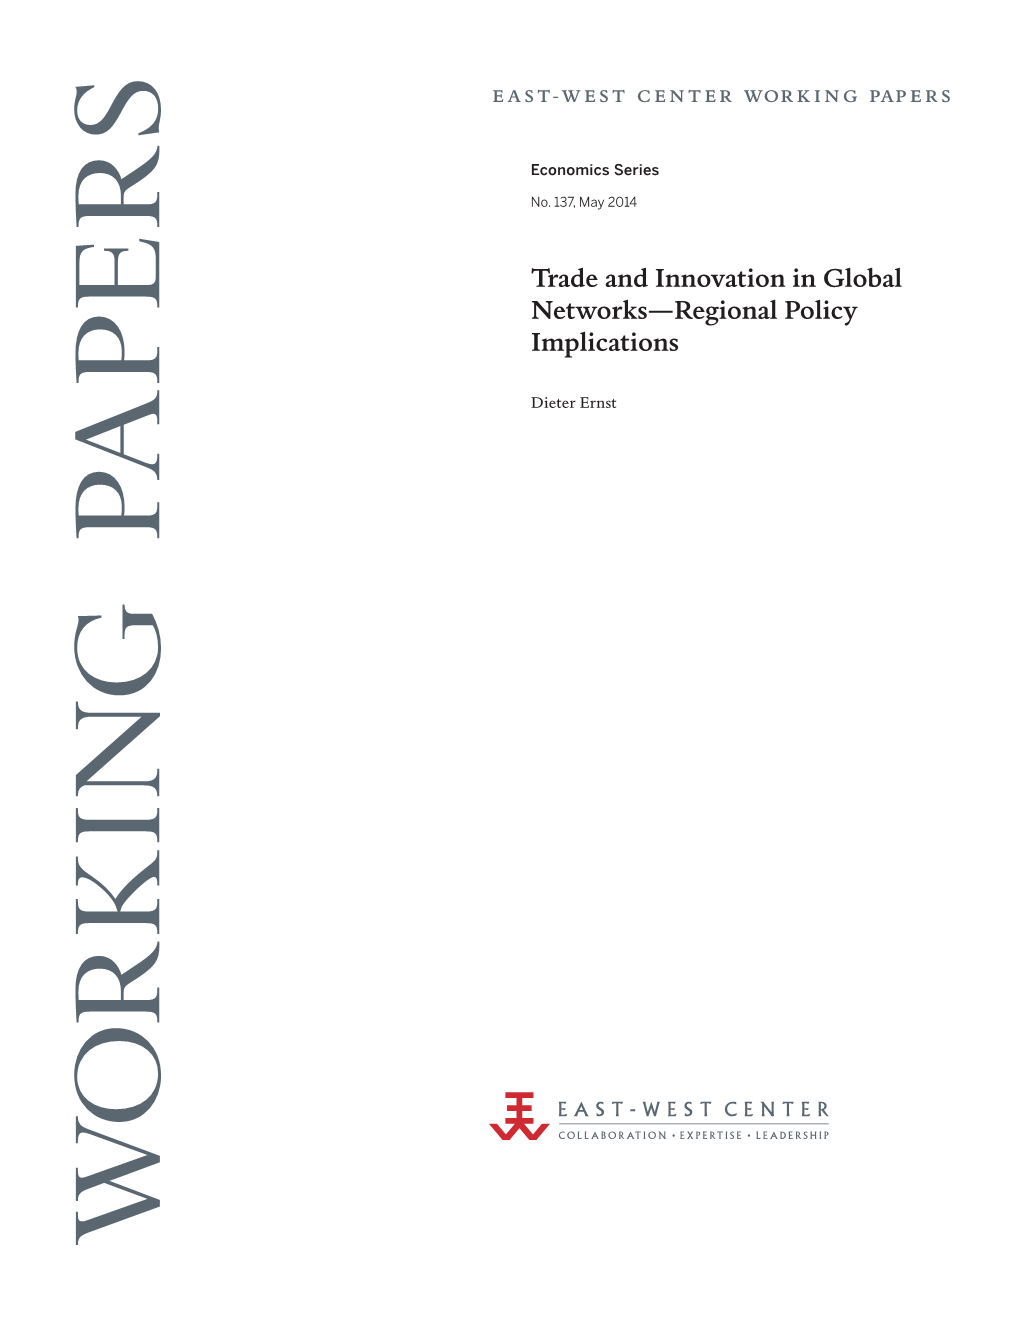 Trade and Innovation in Global Networks—Regional Policy Implications